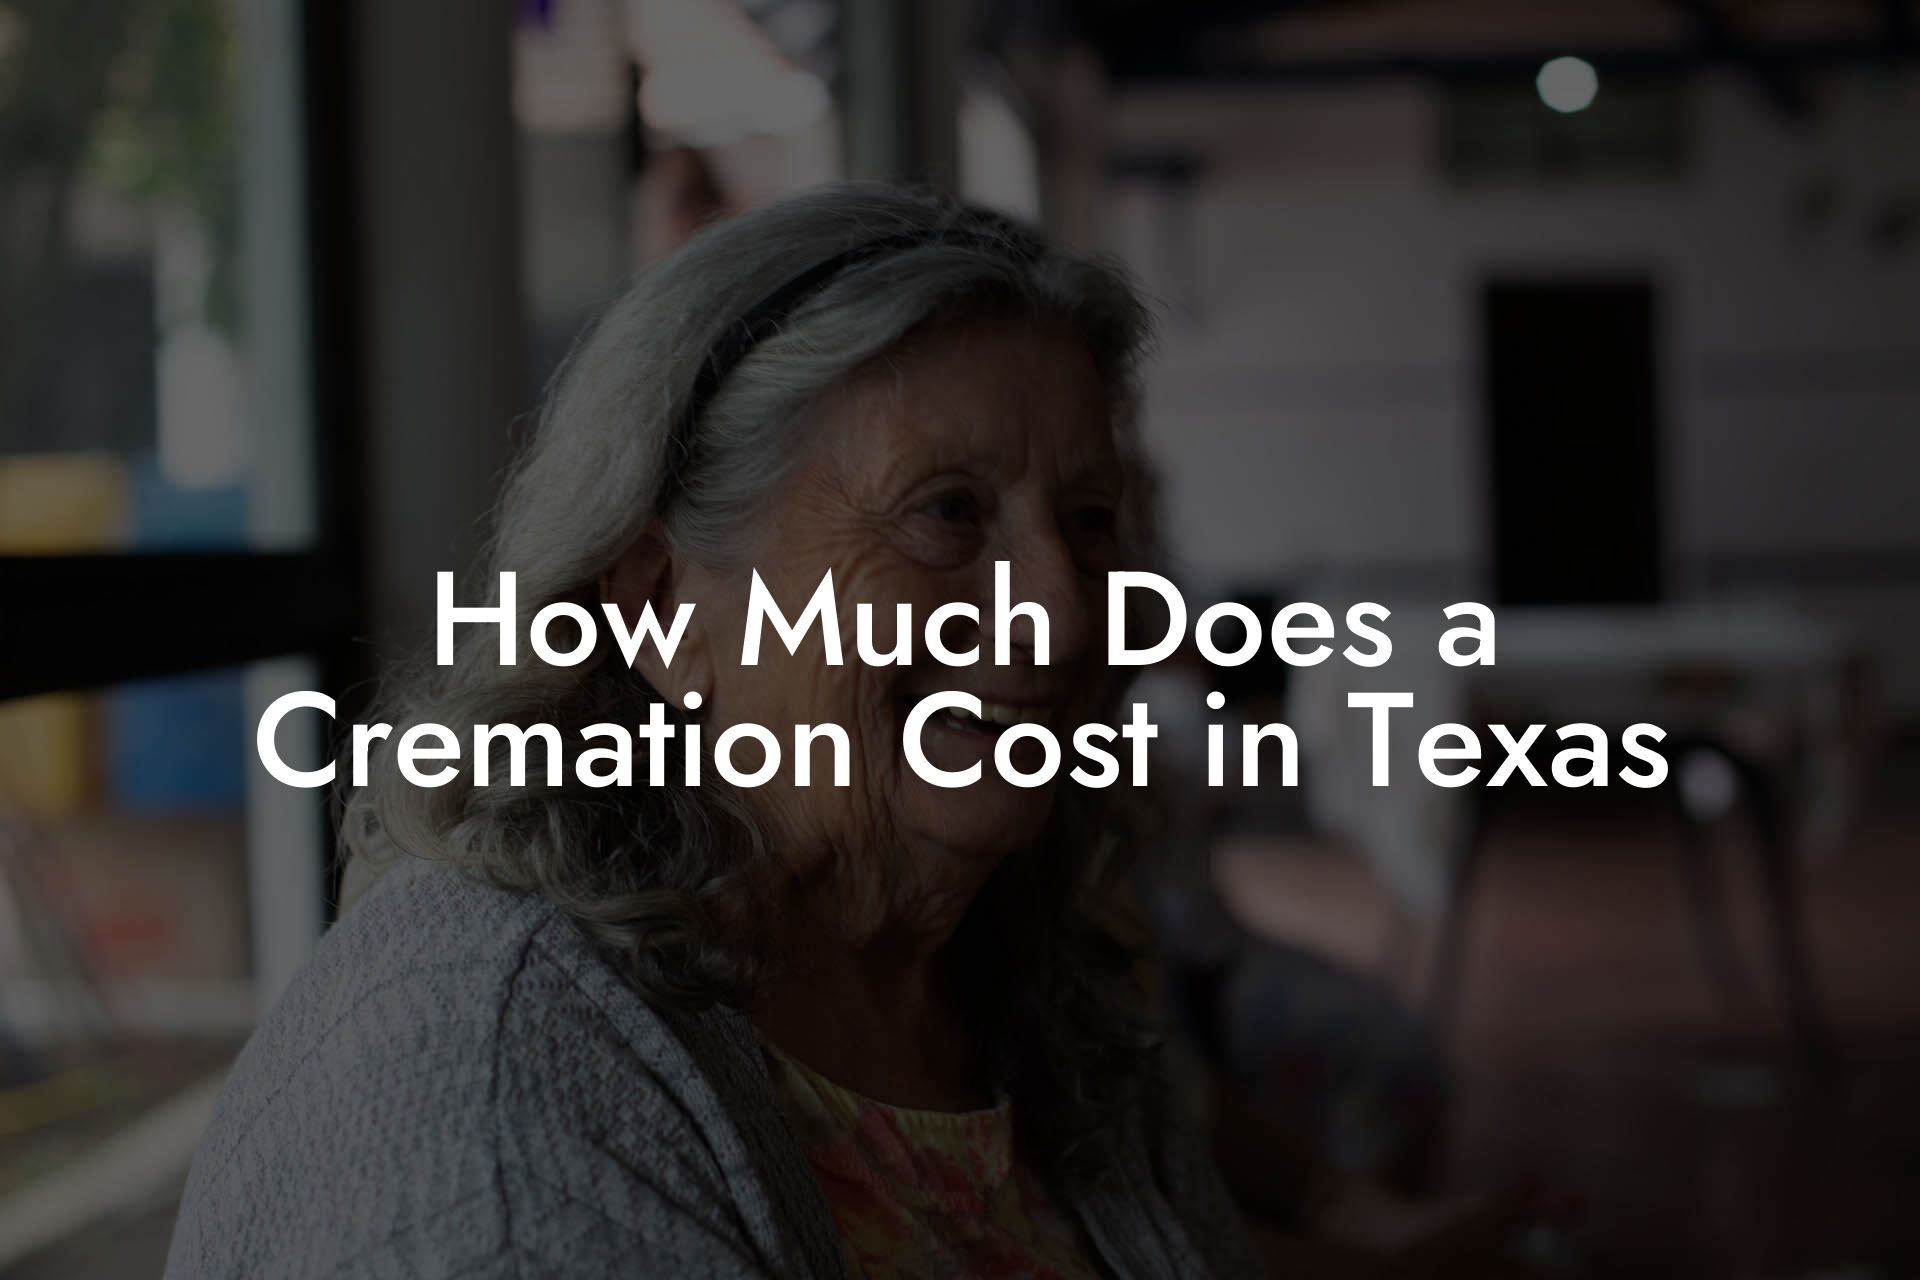 How Much Does a Cremation Cost in Texas